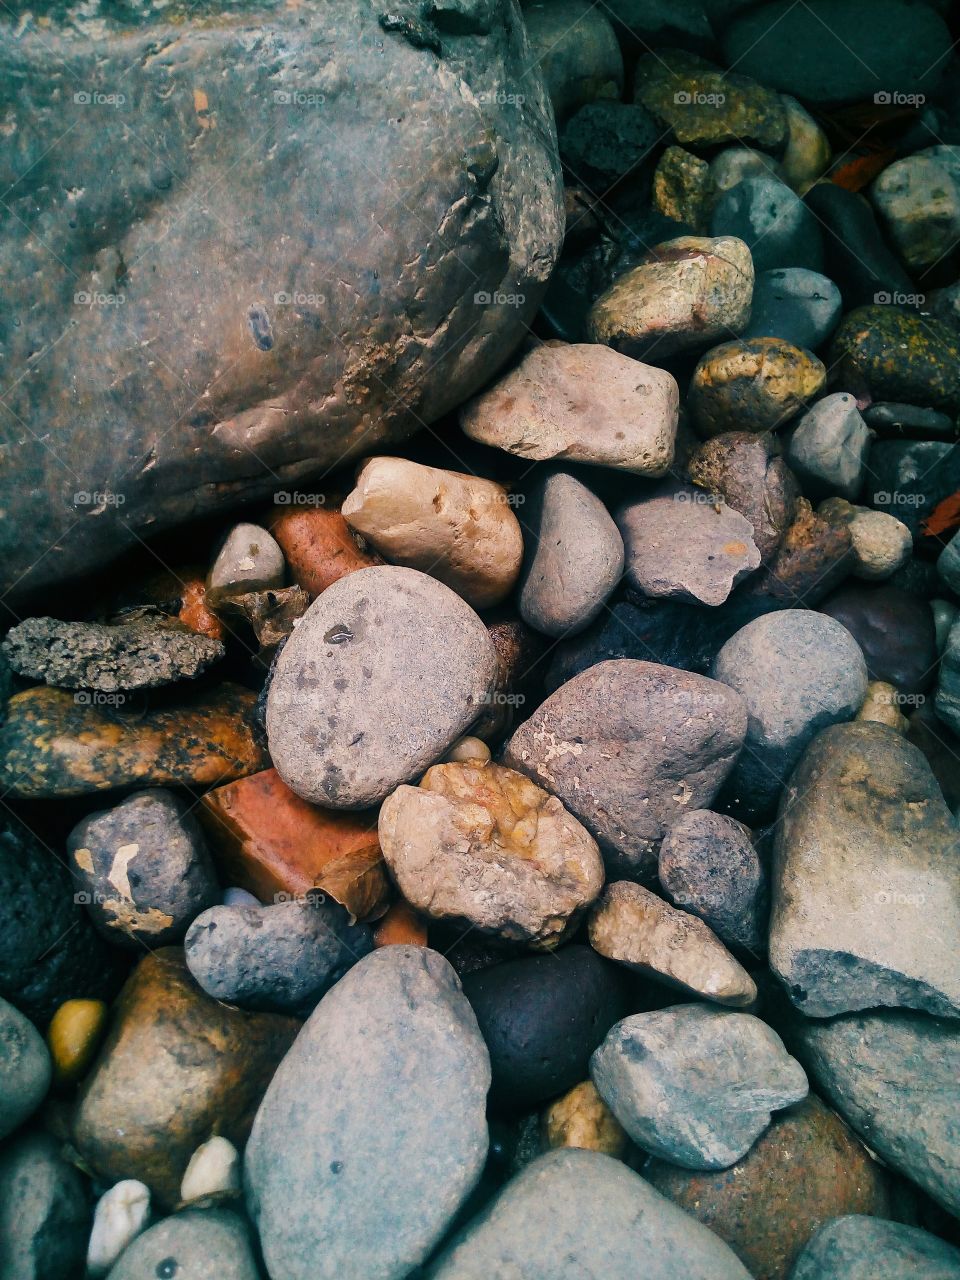 Rocks come in all shapes and sizes, one of the beautys of nature.